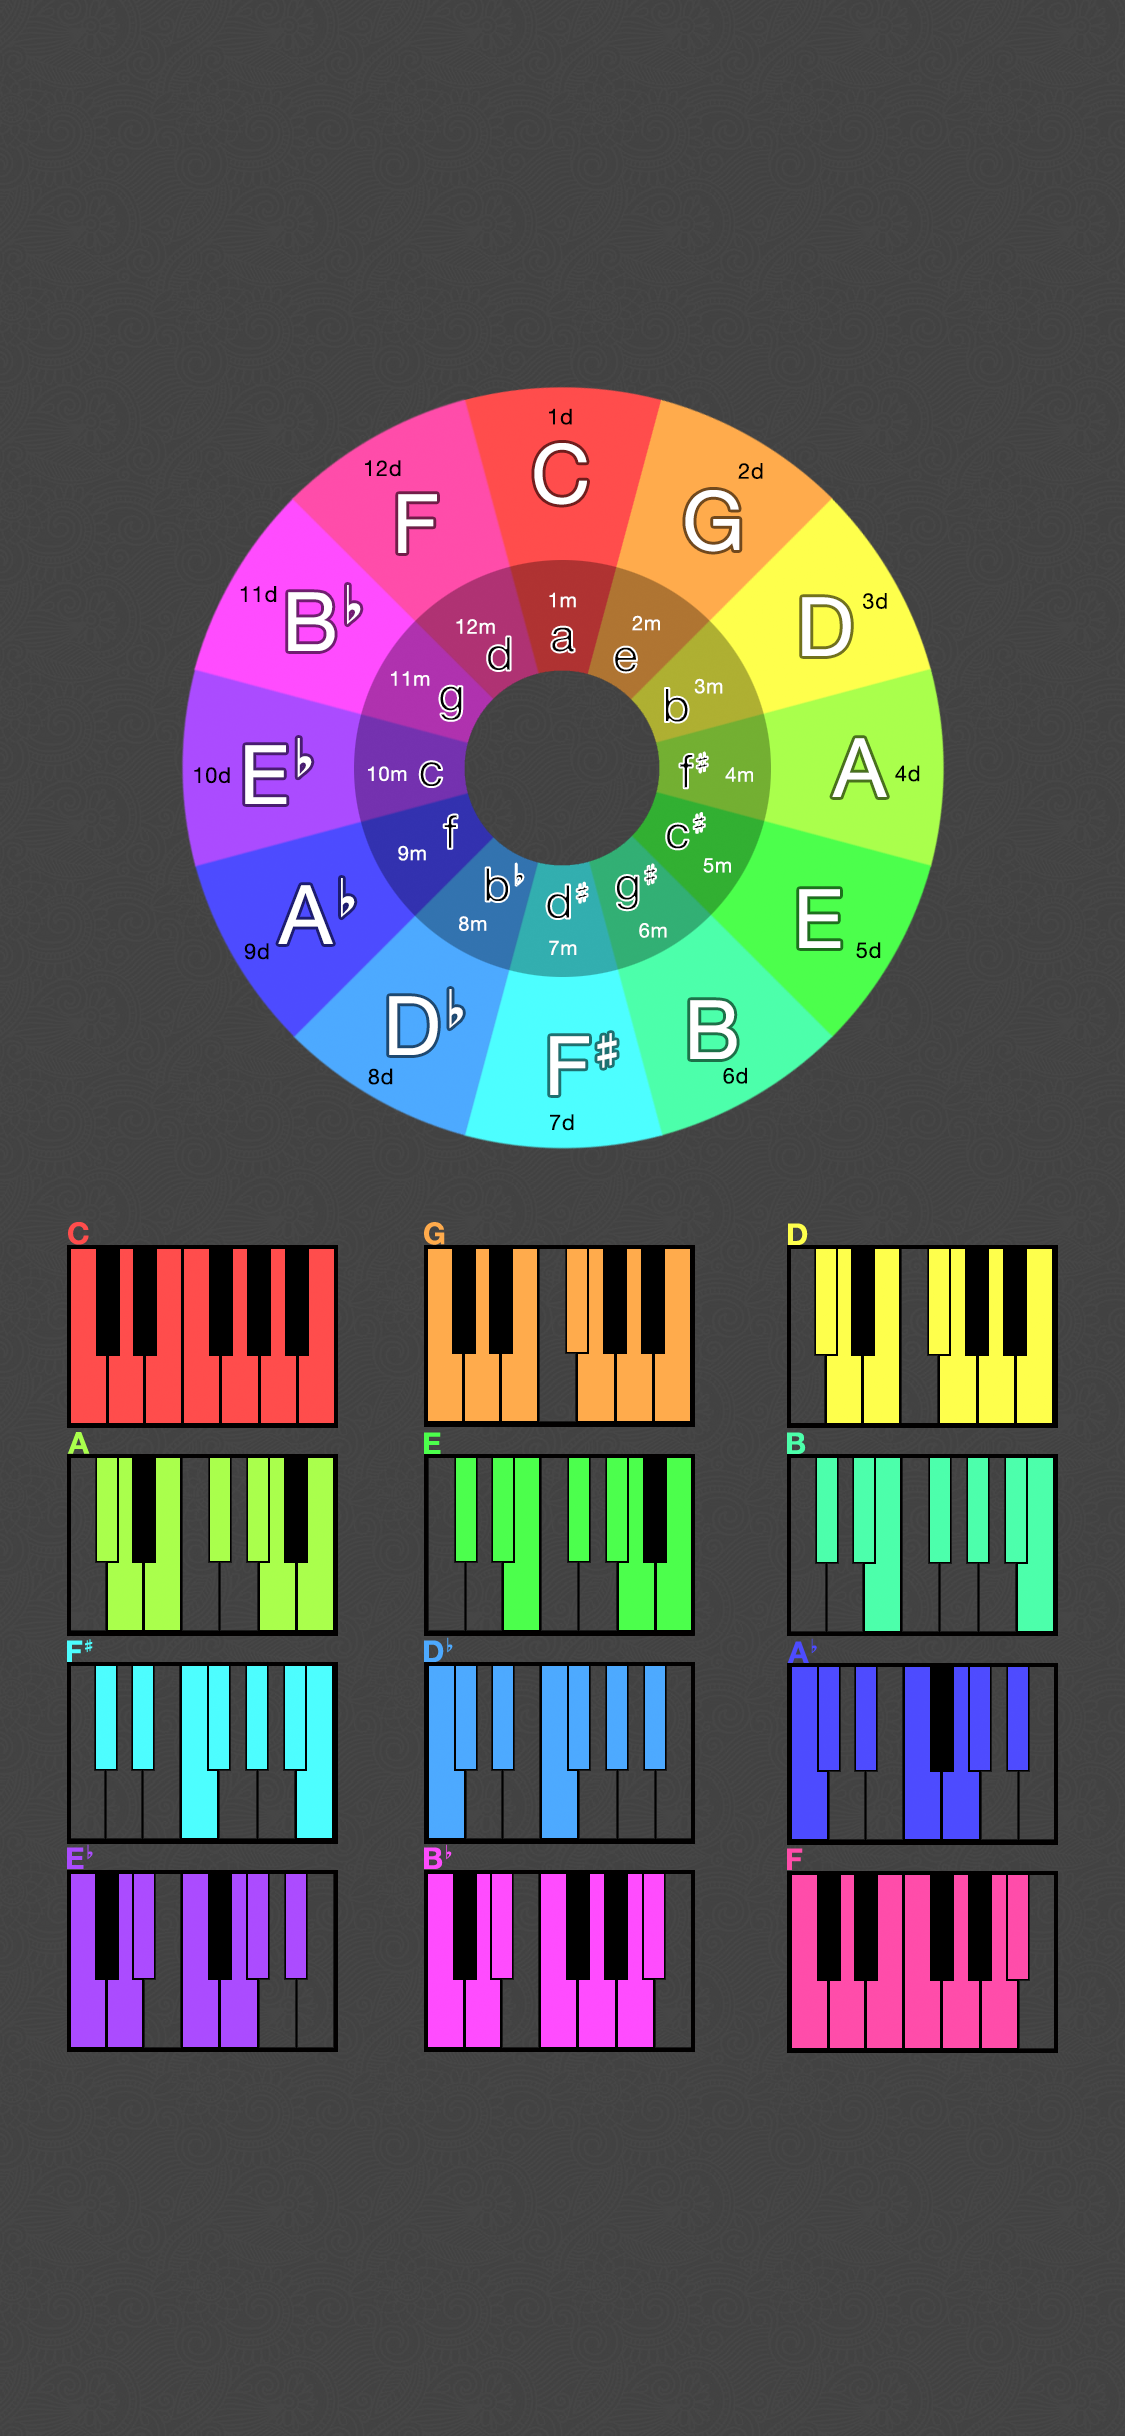 I made a circle of fifths phone wallpaper because I suck